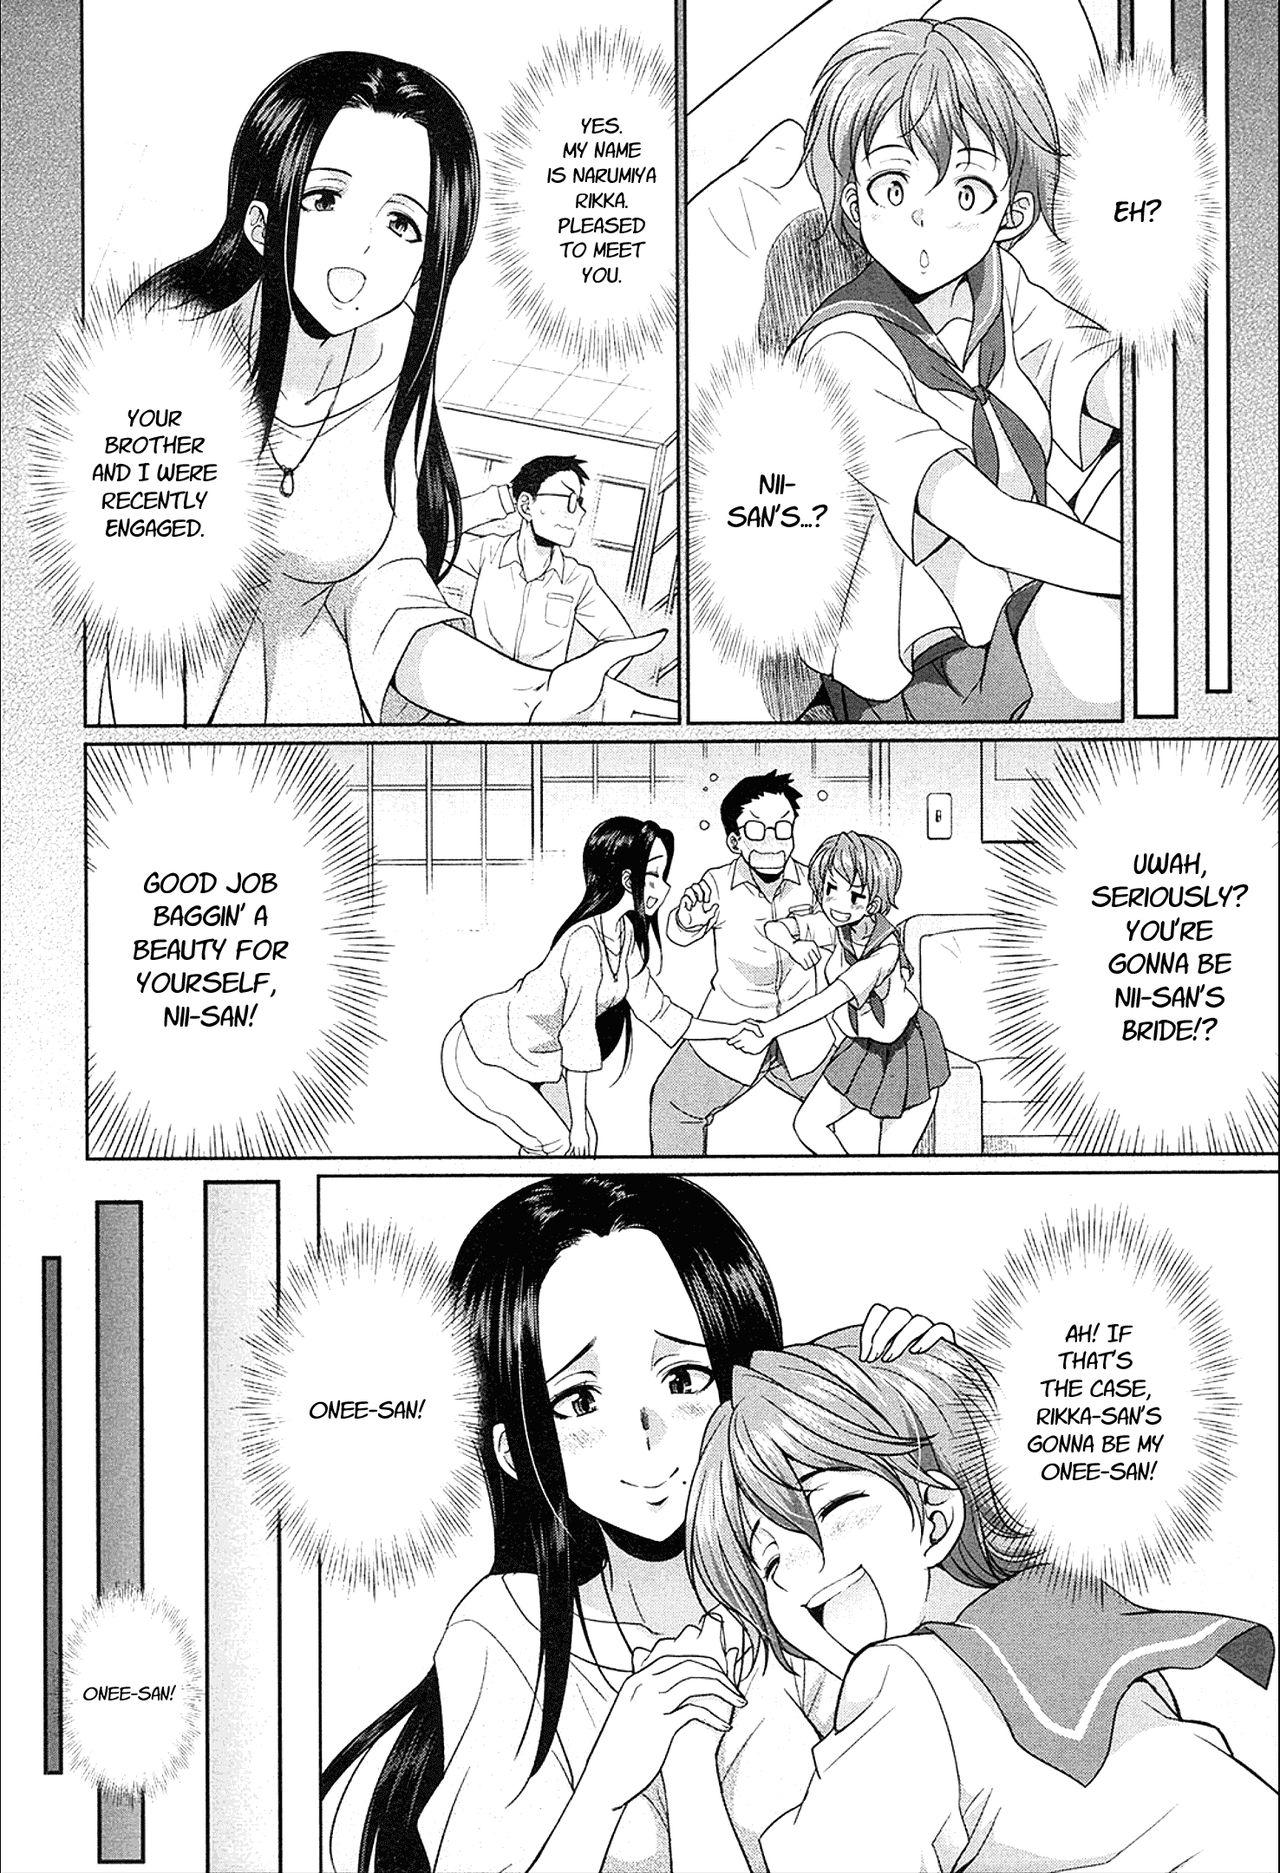 Cojiendo Gishimai no Kankei The Relationship of the Sisters-in-Law Original Script Uncensored Analsex - Page 4